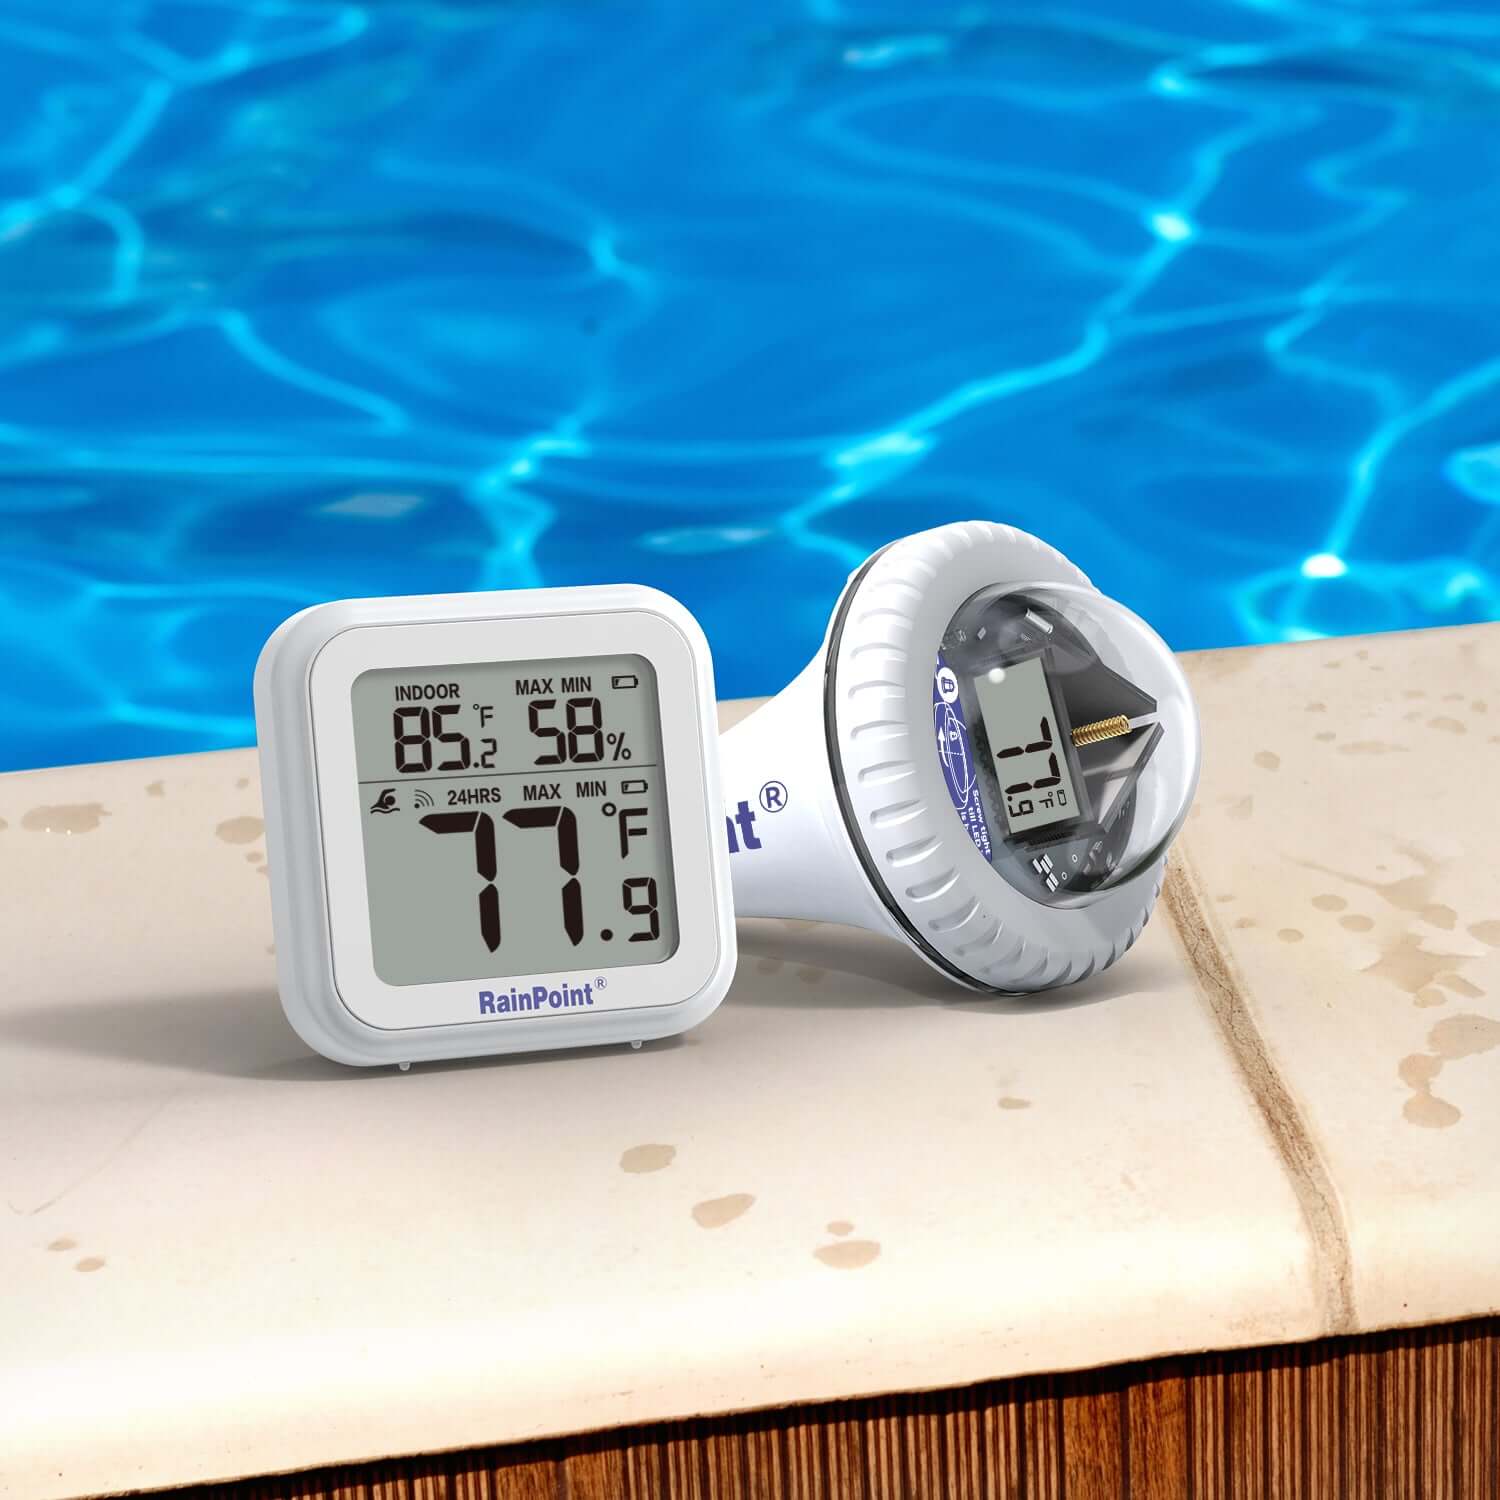 Room Thermometer (In-Outdoor Thermometer) Price in BD